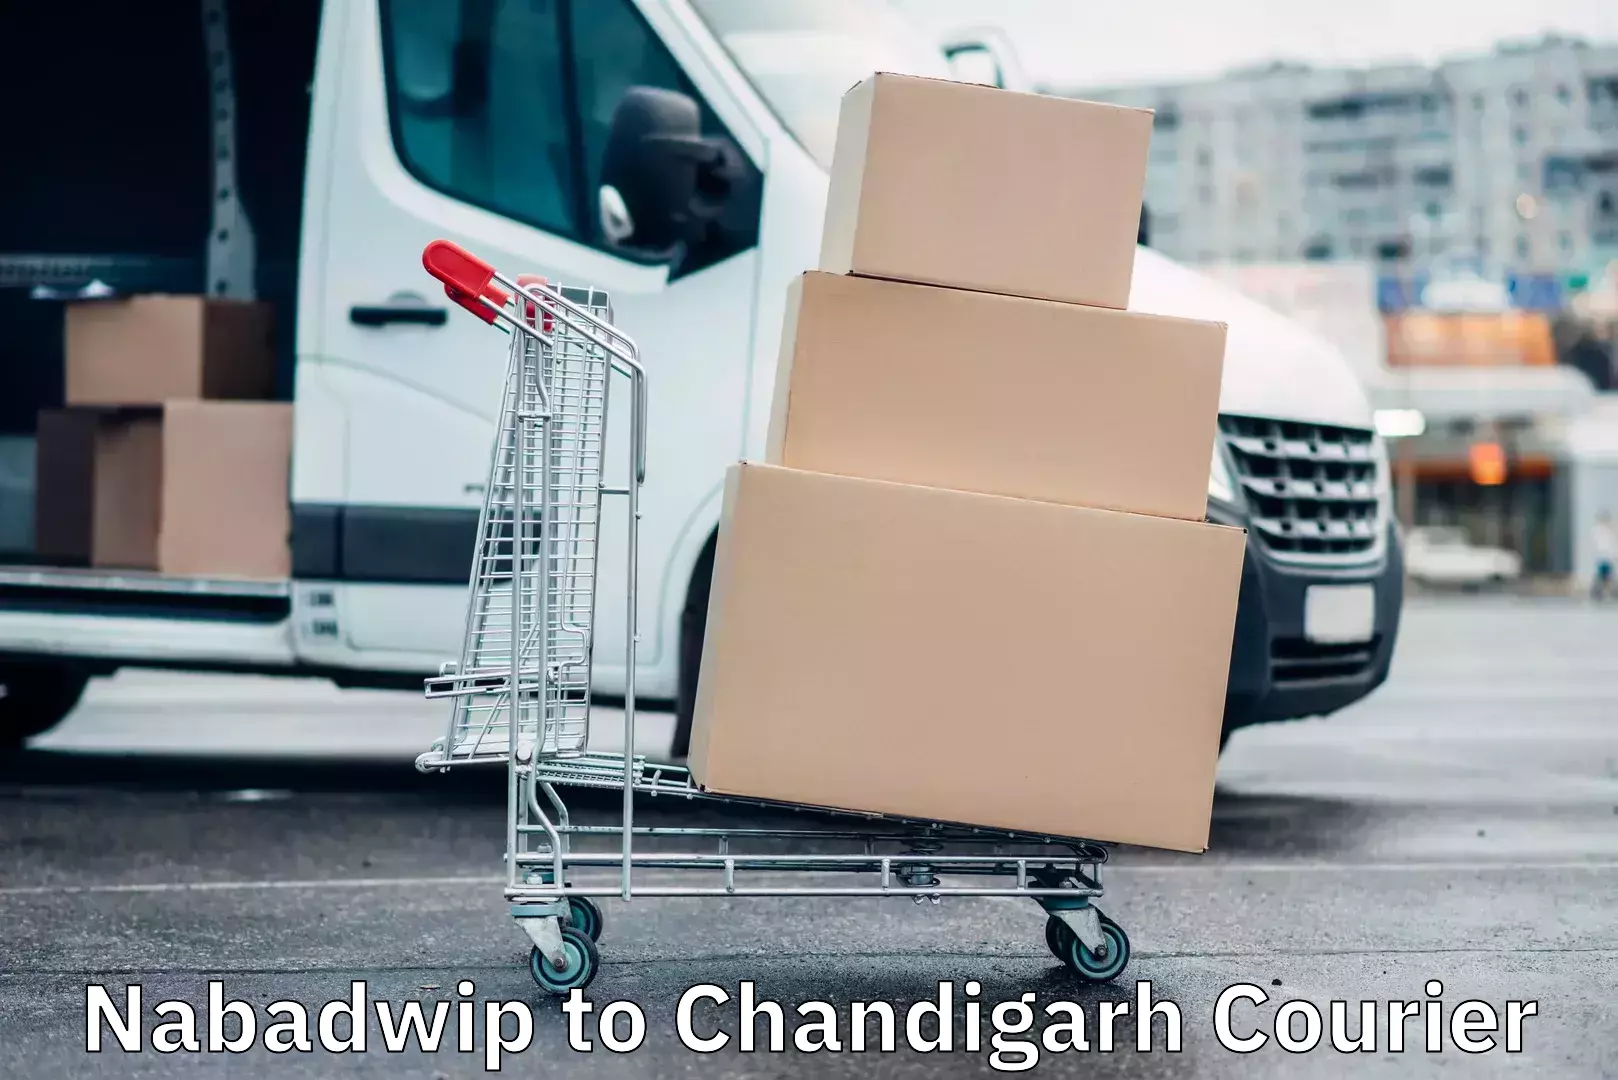 24/7 courier service Nabadwip to Chandigarh